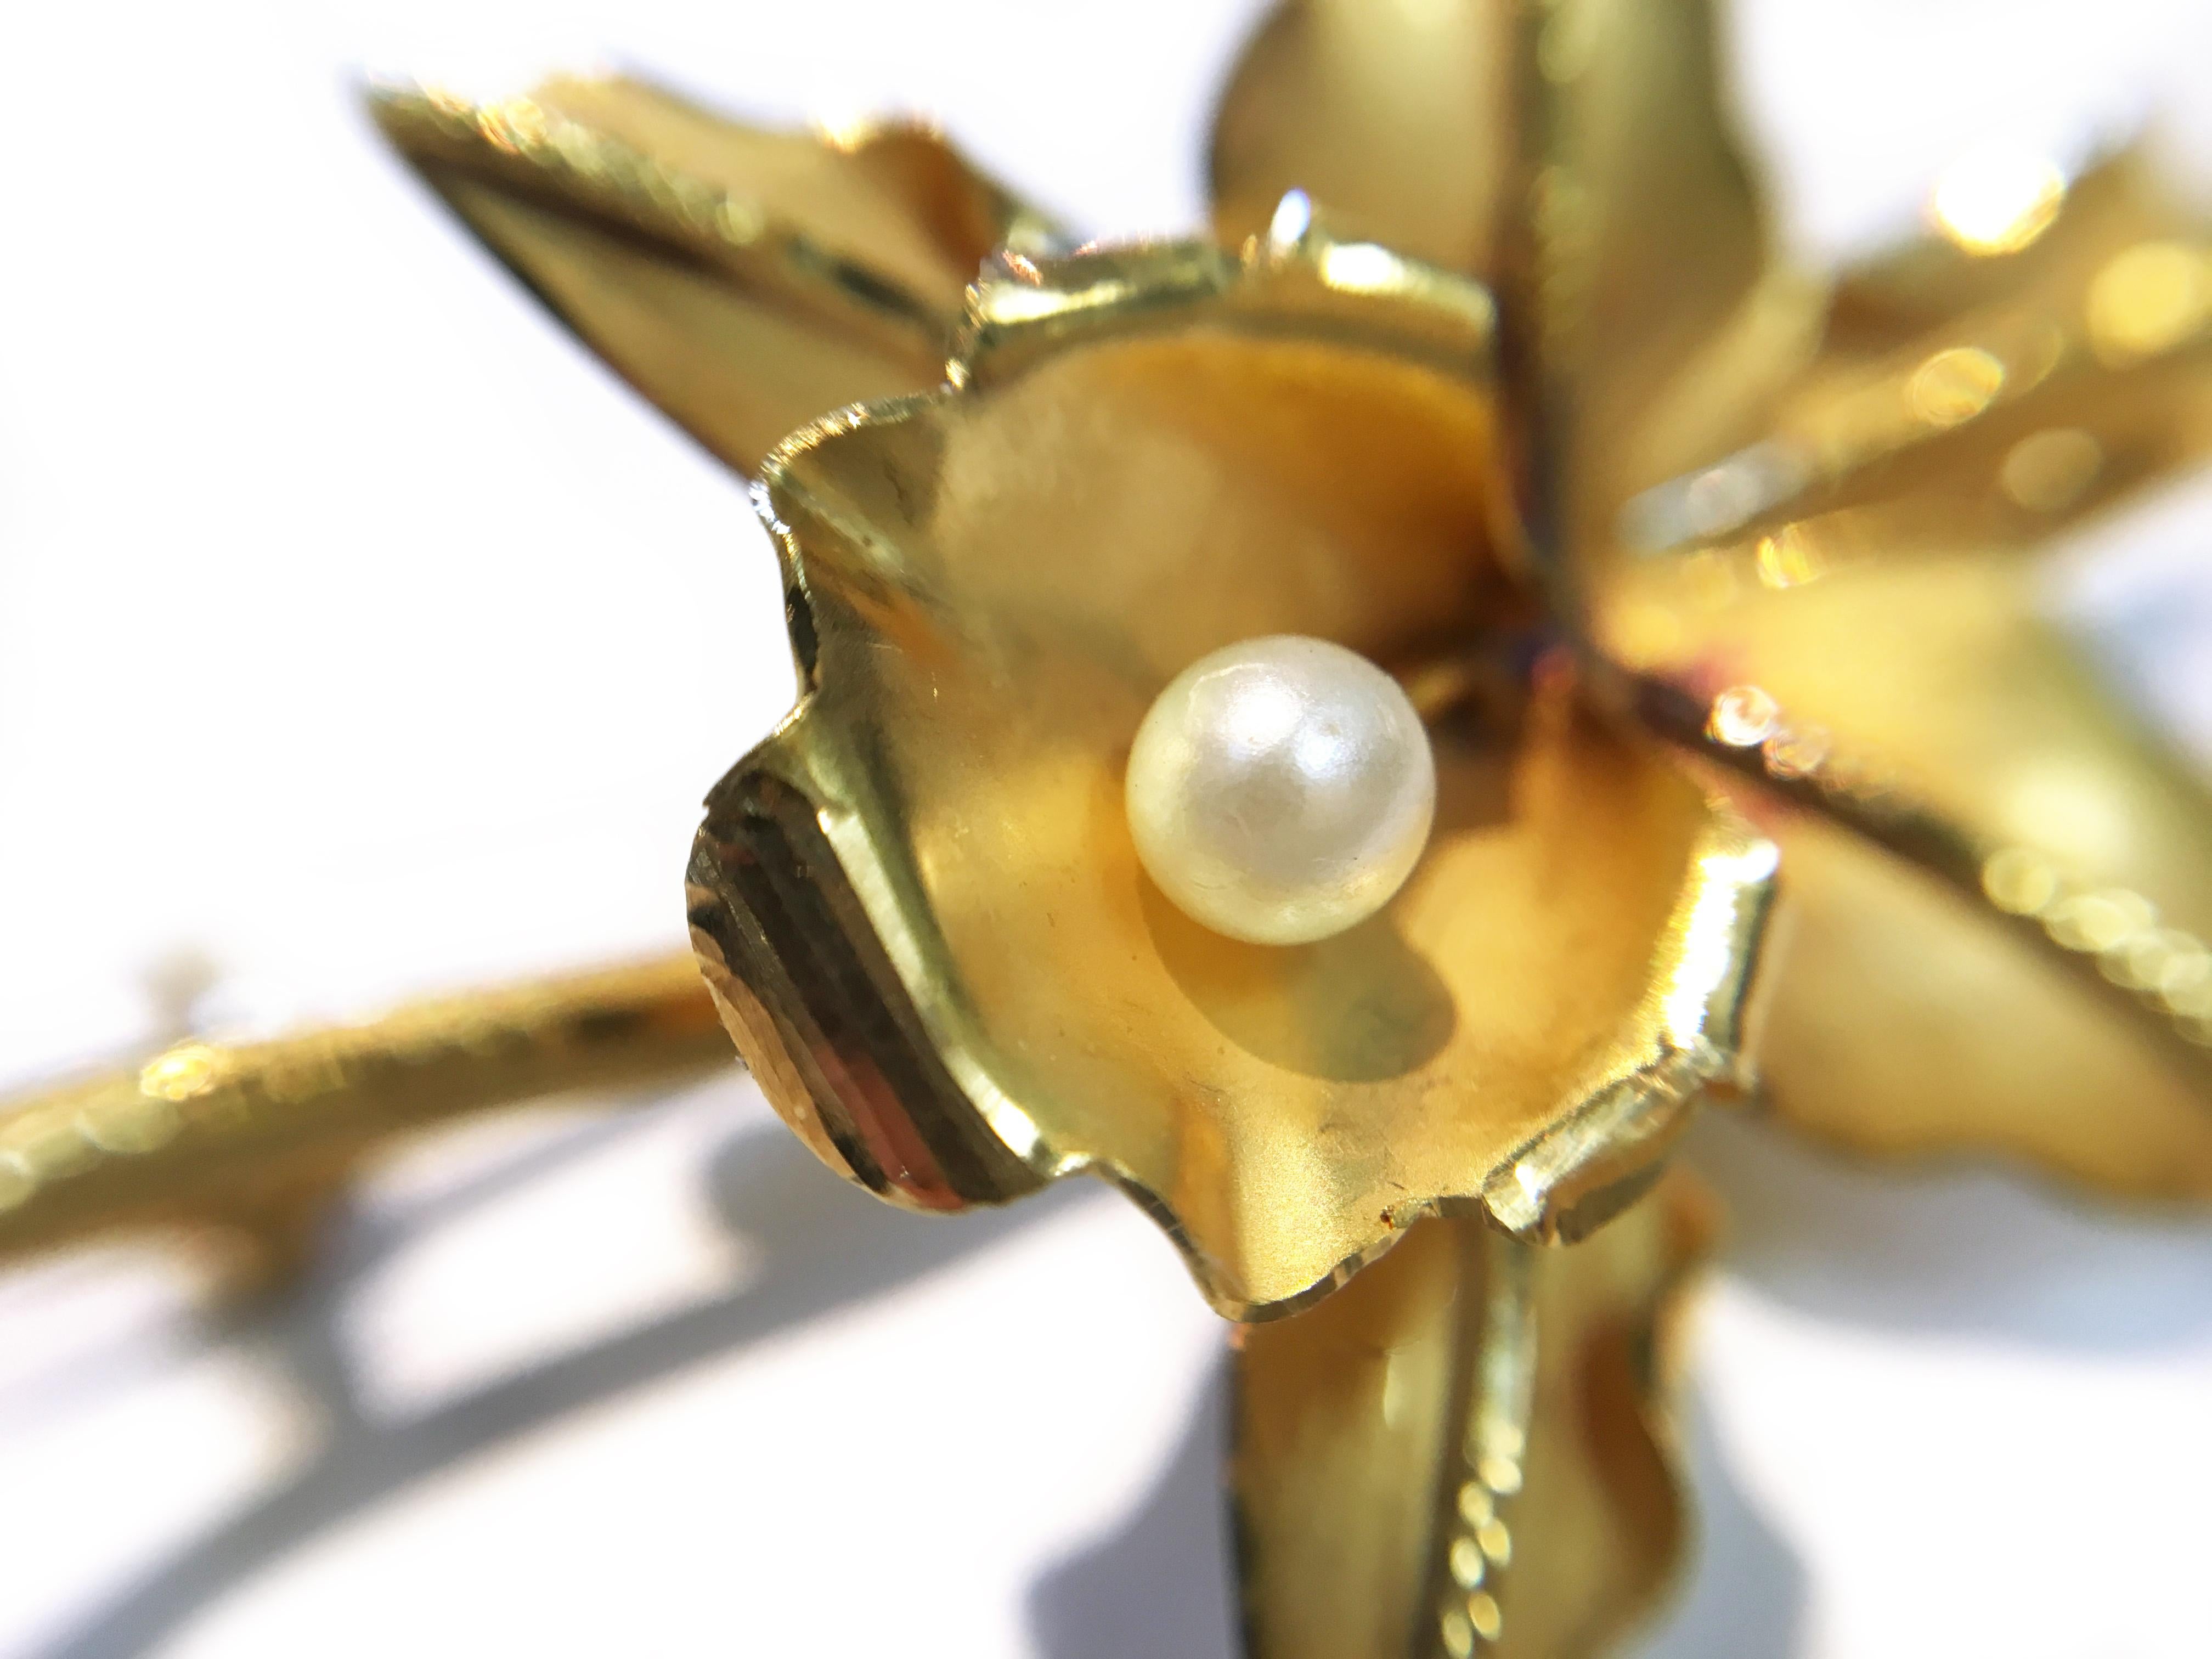 18 Karat Yellow Gold Flower Pearl Brooch Pin. Lovely flower brooch pin with the center of each pedal being highly texturized and a single 3.8mm pearl set at the center. The brooch/pin has a gold weight of 5.6 grams. Stamped on the bottom of the stem